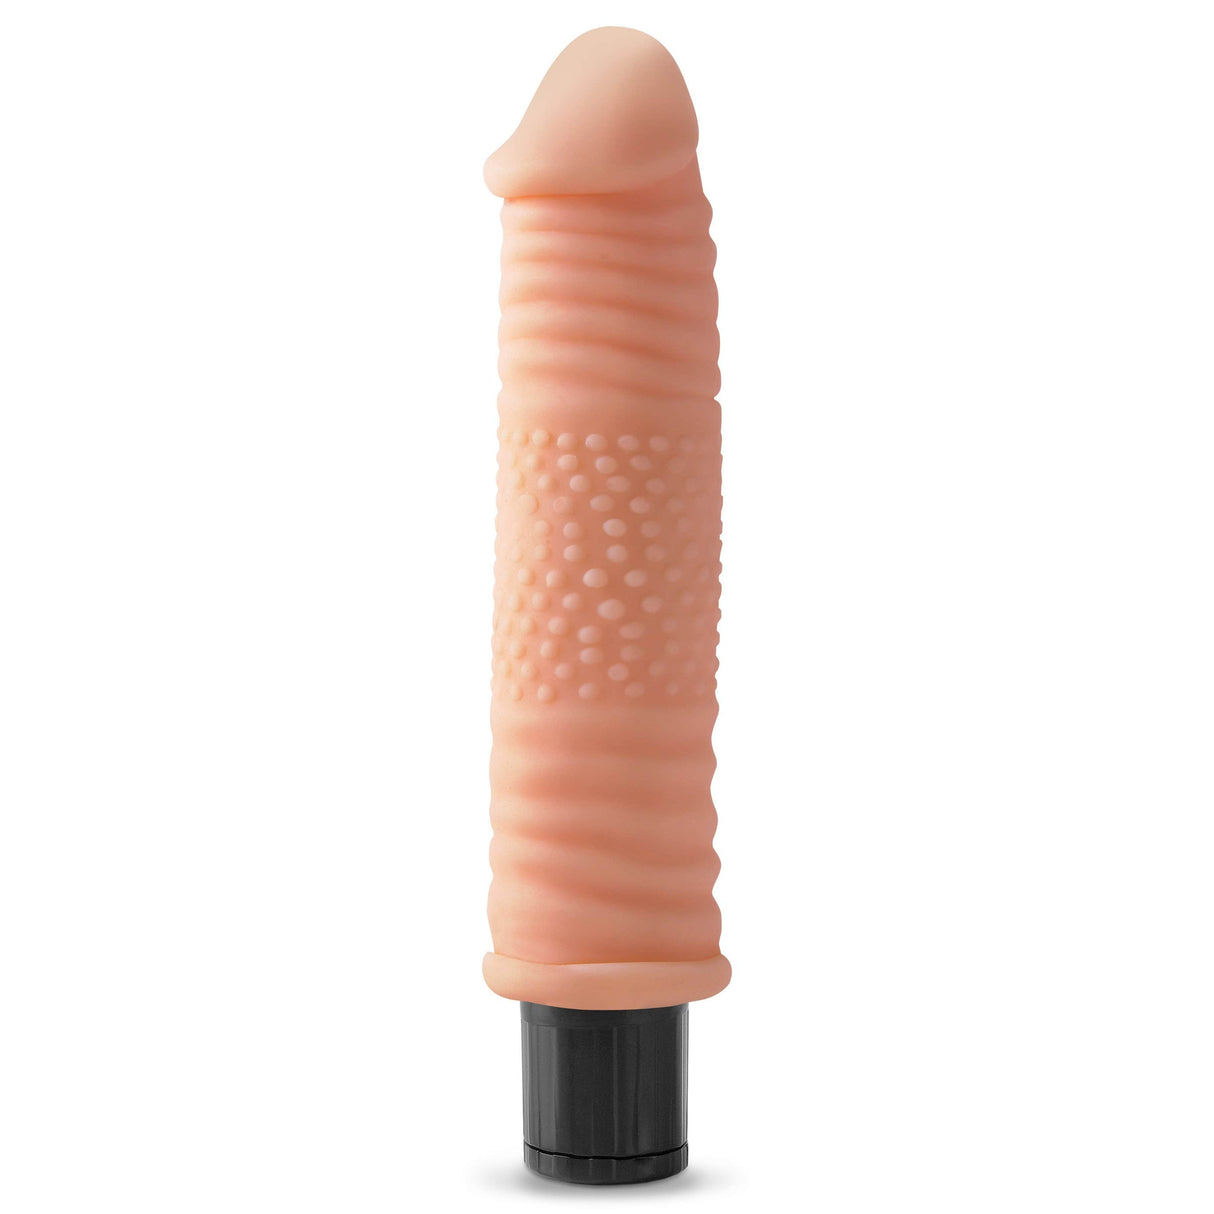 Pipedream - Real Feel No. 12 Vibrating Dildo (Beige) PD1992 CherryAffairs